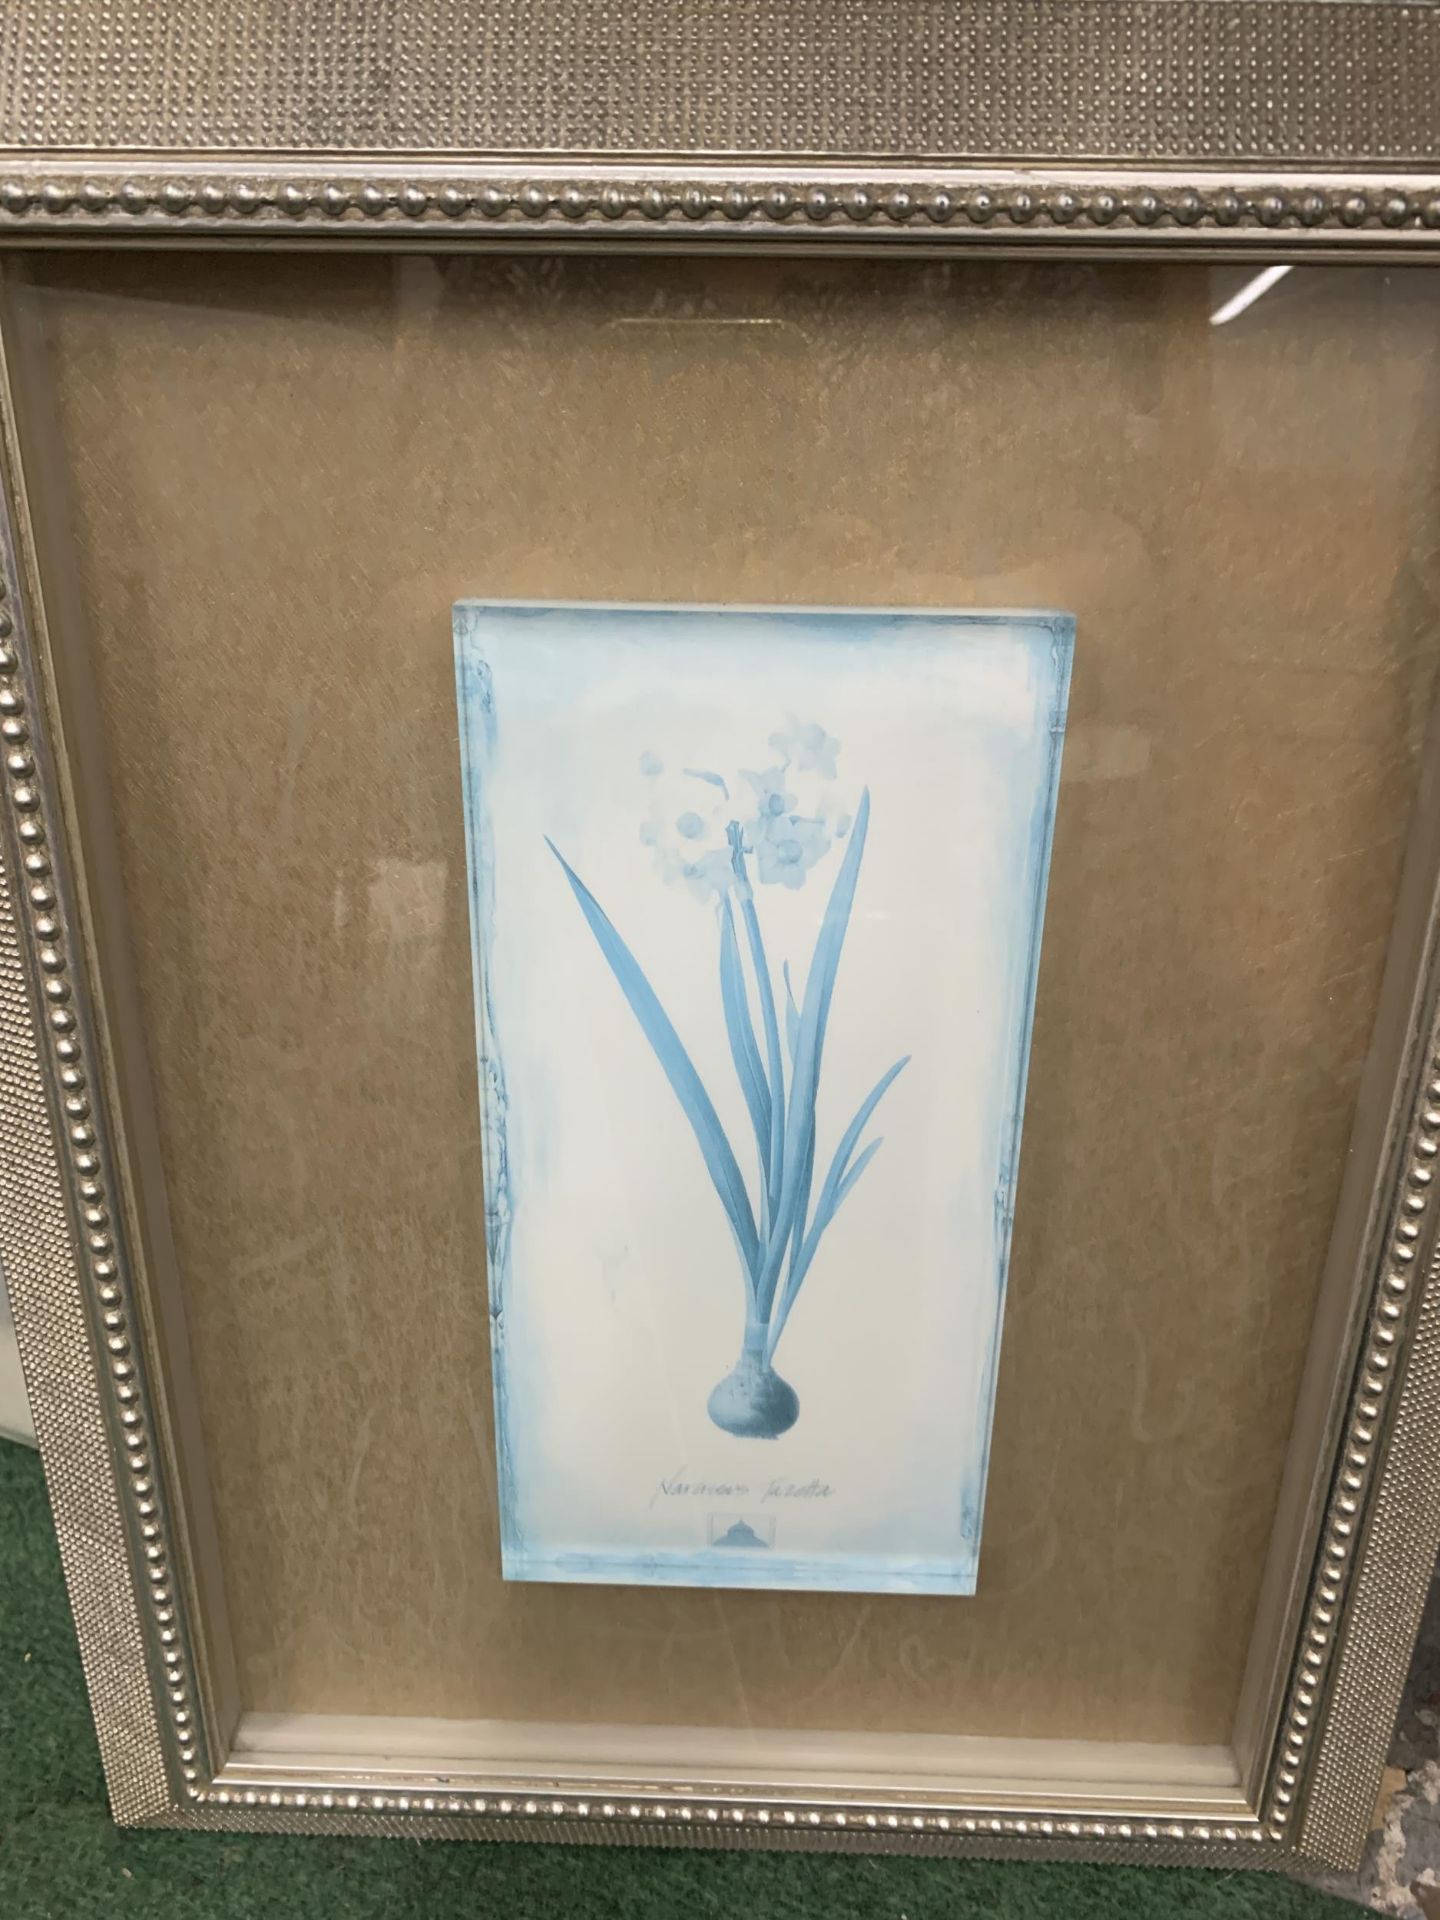 THREE FLORAL ENCAPSULATED GLASS ART DESIGNS IN A SILVER COLOURED FRAME (TWO 18" X 14" AND A 16" X - Image 4 of 4